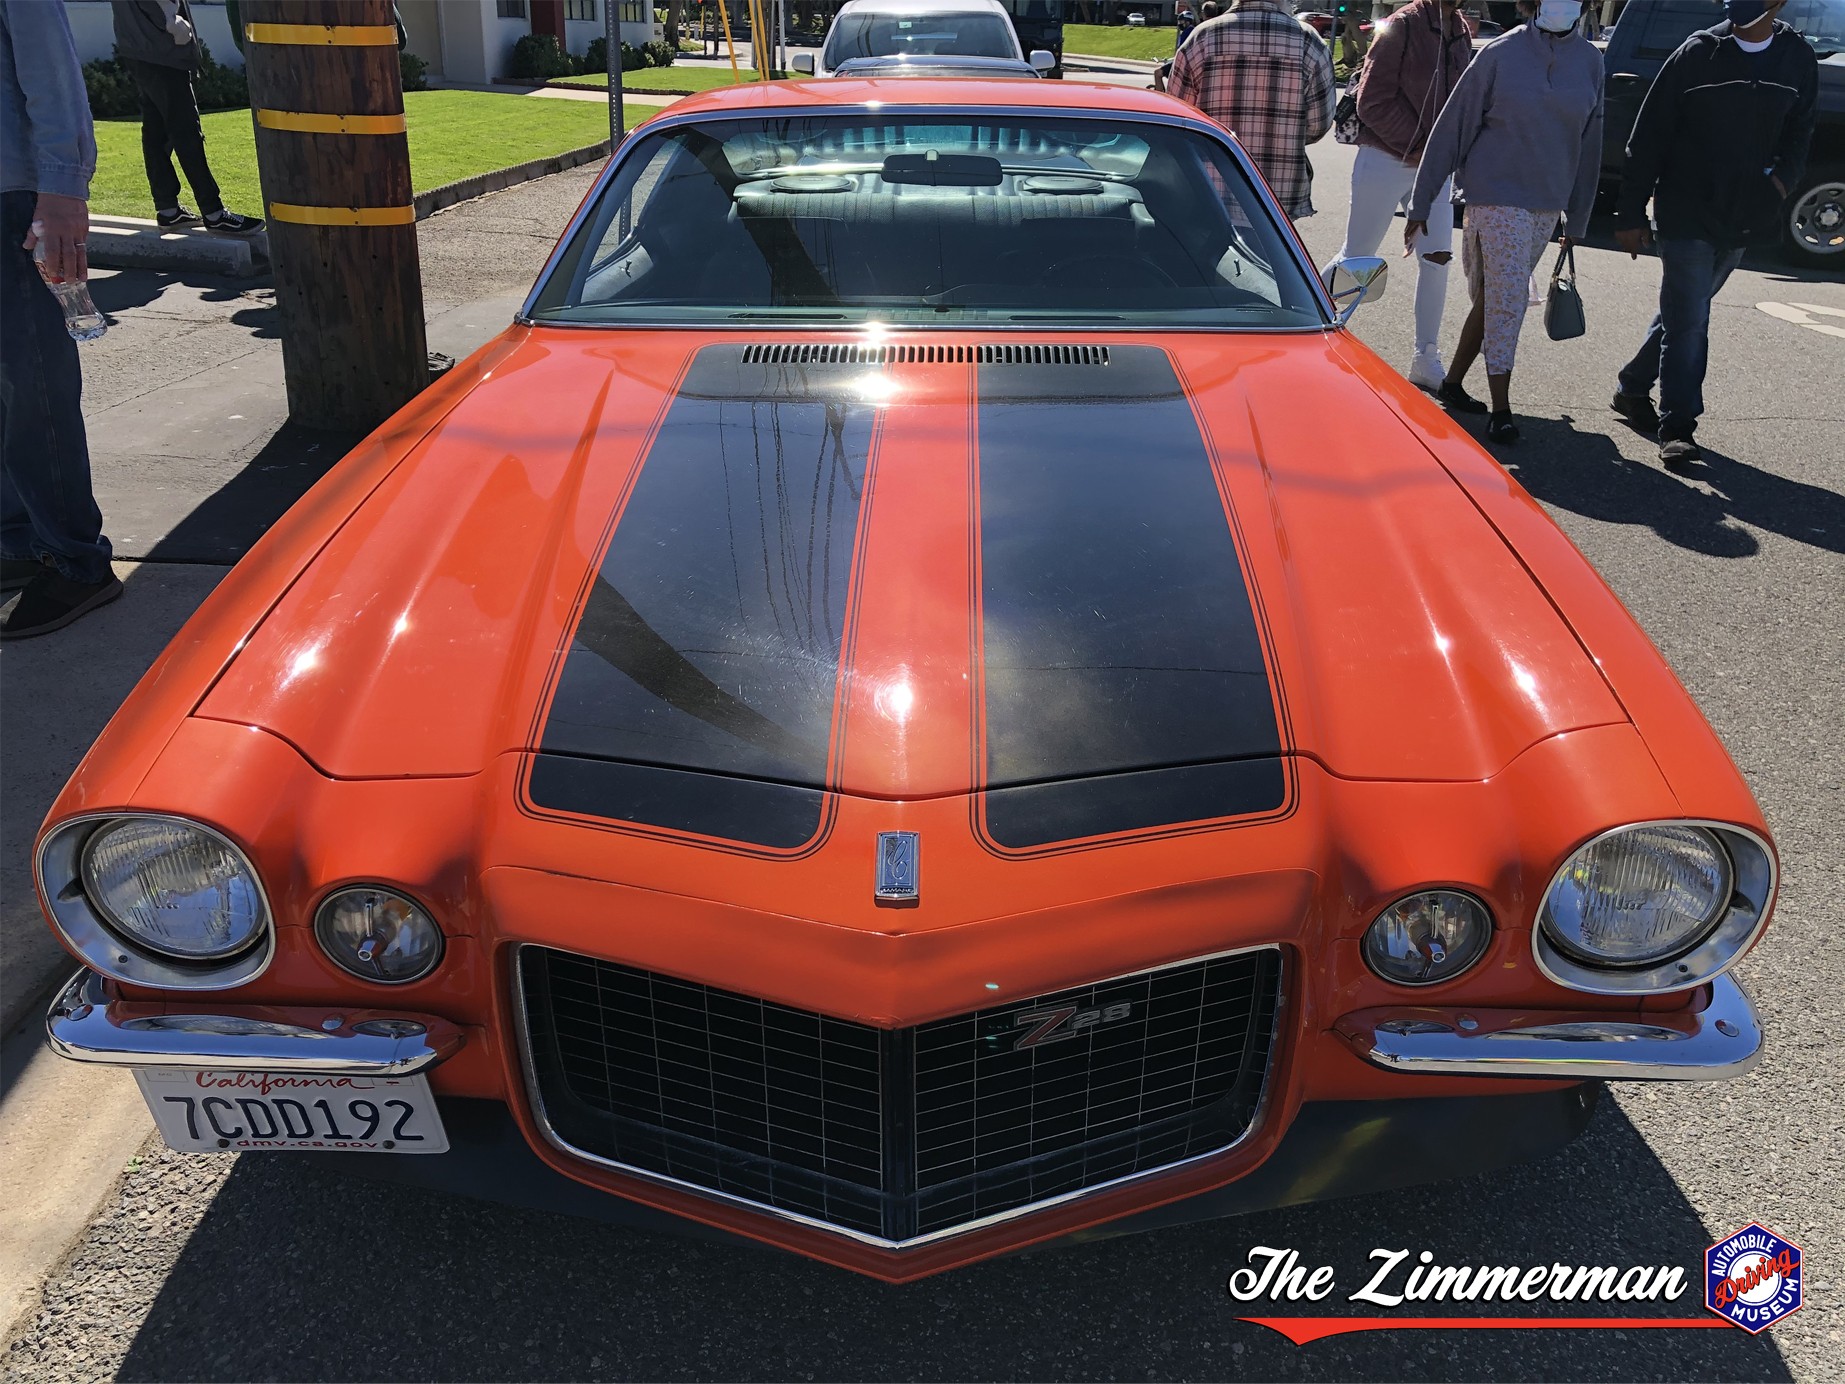 1967 Camaro at the ADM Muscle Car Show